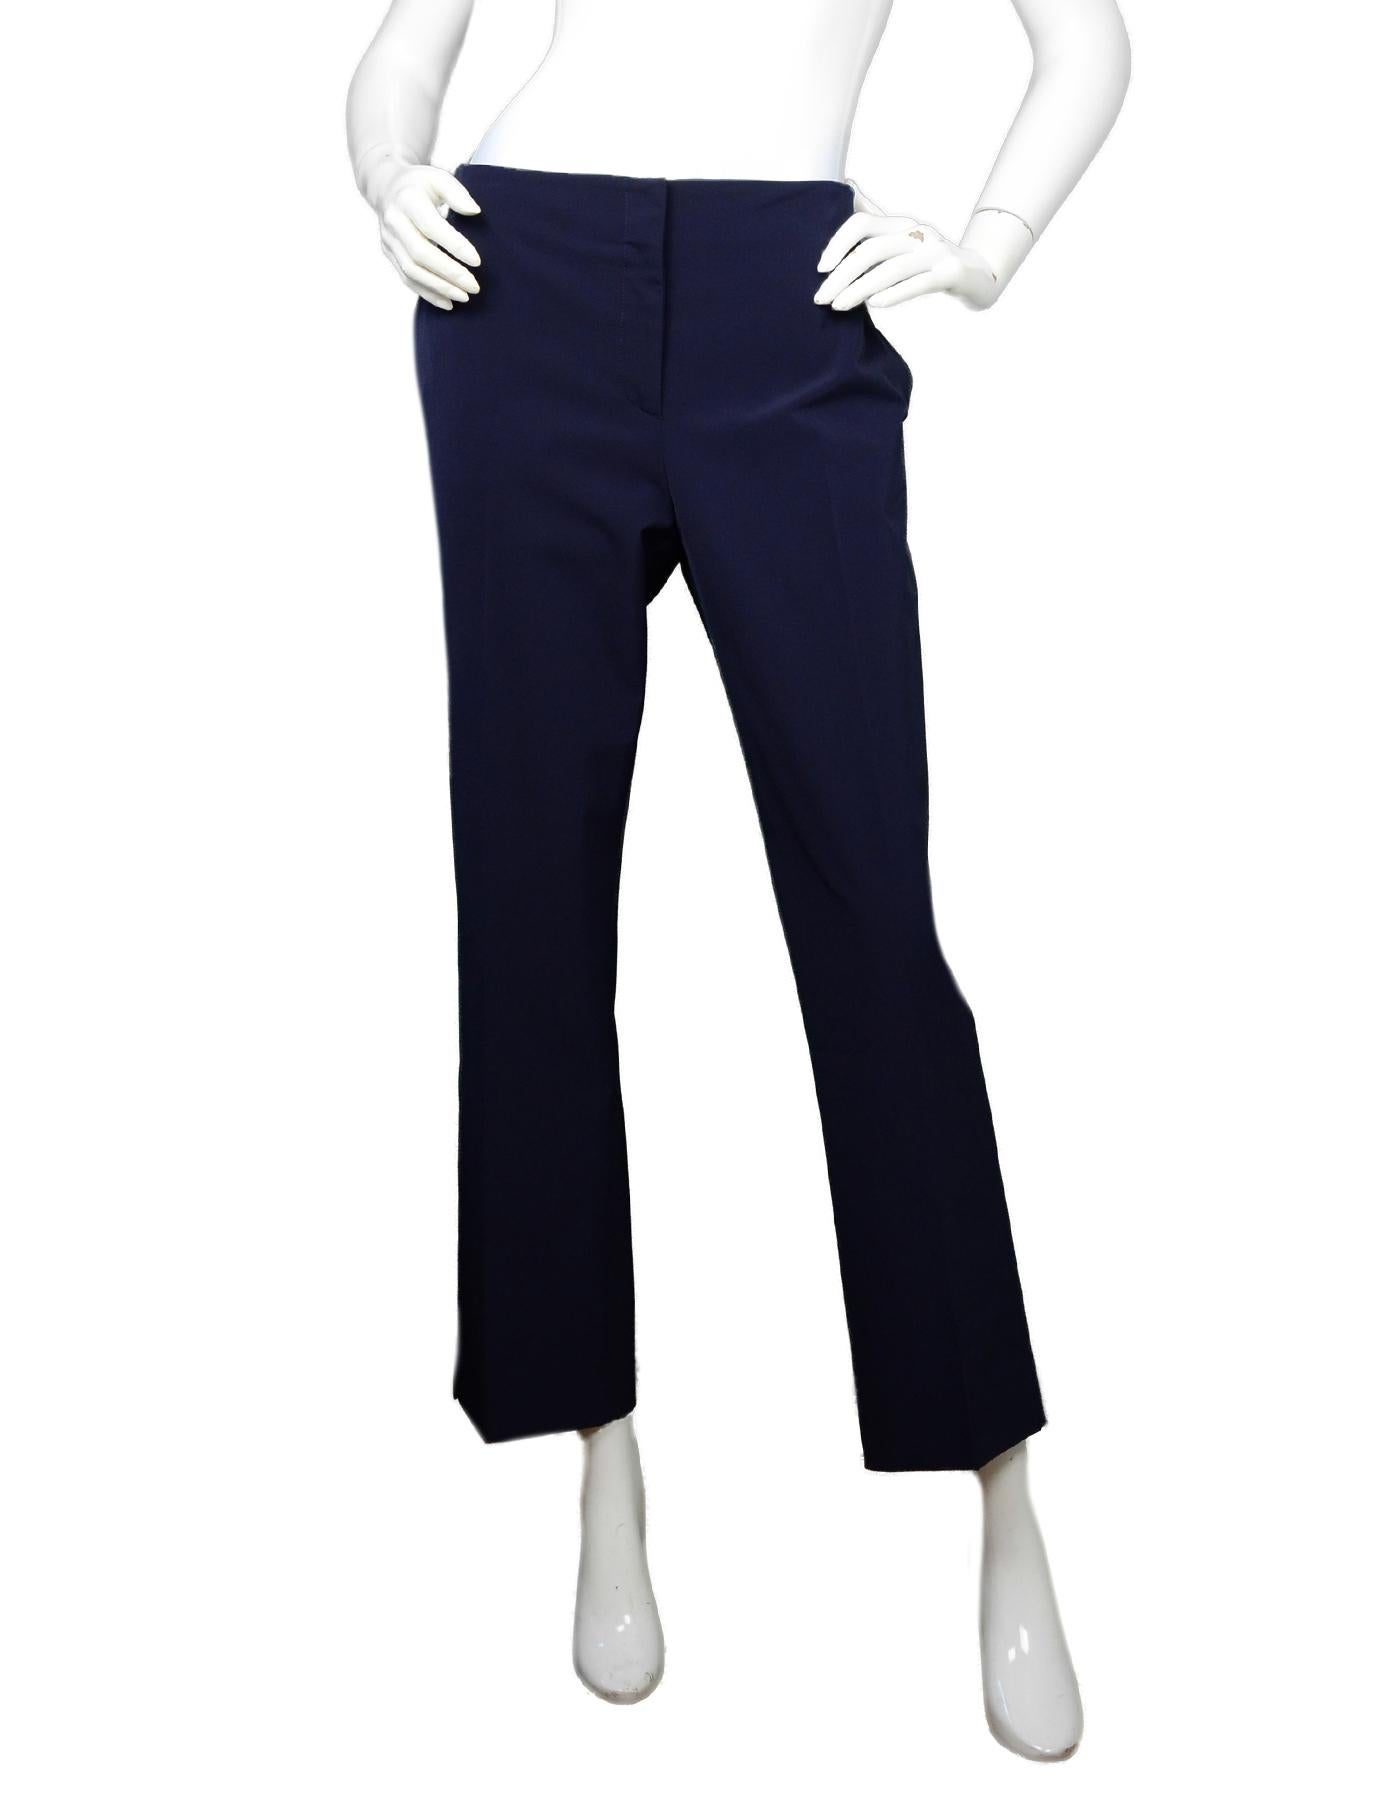 Prada Navy Techno Stretch Ankle Pants Sz IT48/US12

Made In: Italy
Color: Navy
Materials: 89% polyester, 11% elastane, pocket lining- 100% cupro 
Closure/Opening: Zipper and button front
Overall Condition: Excellent pre-owned condition 
Estimated